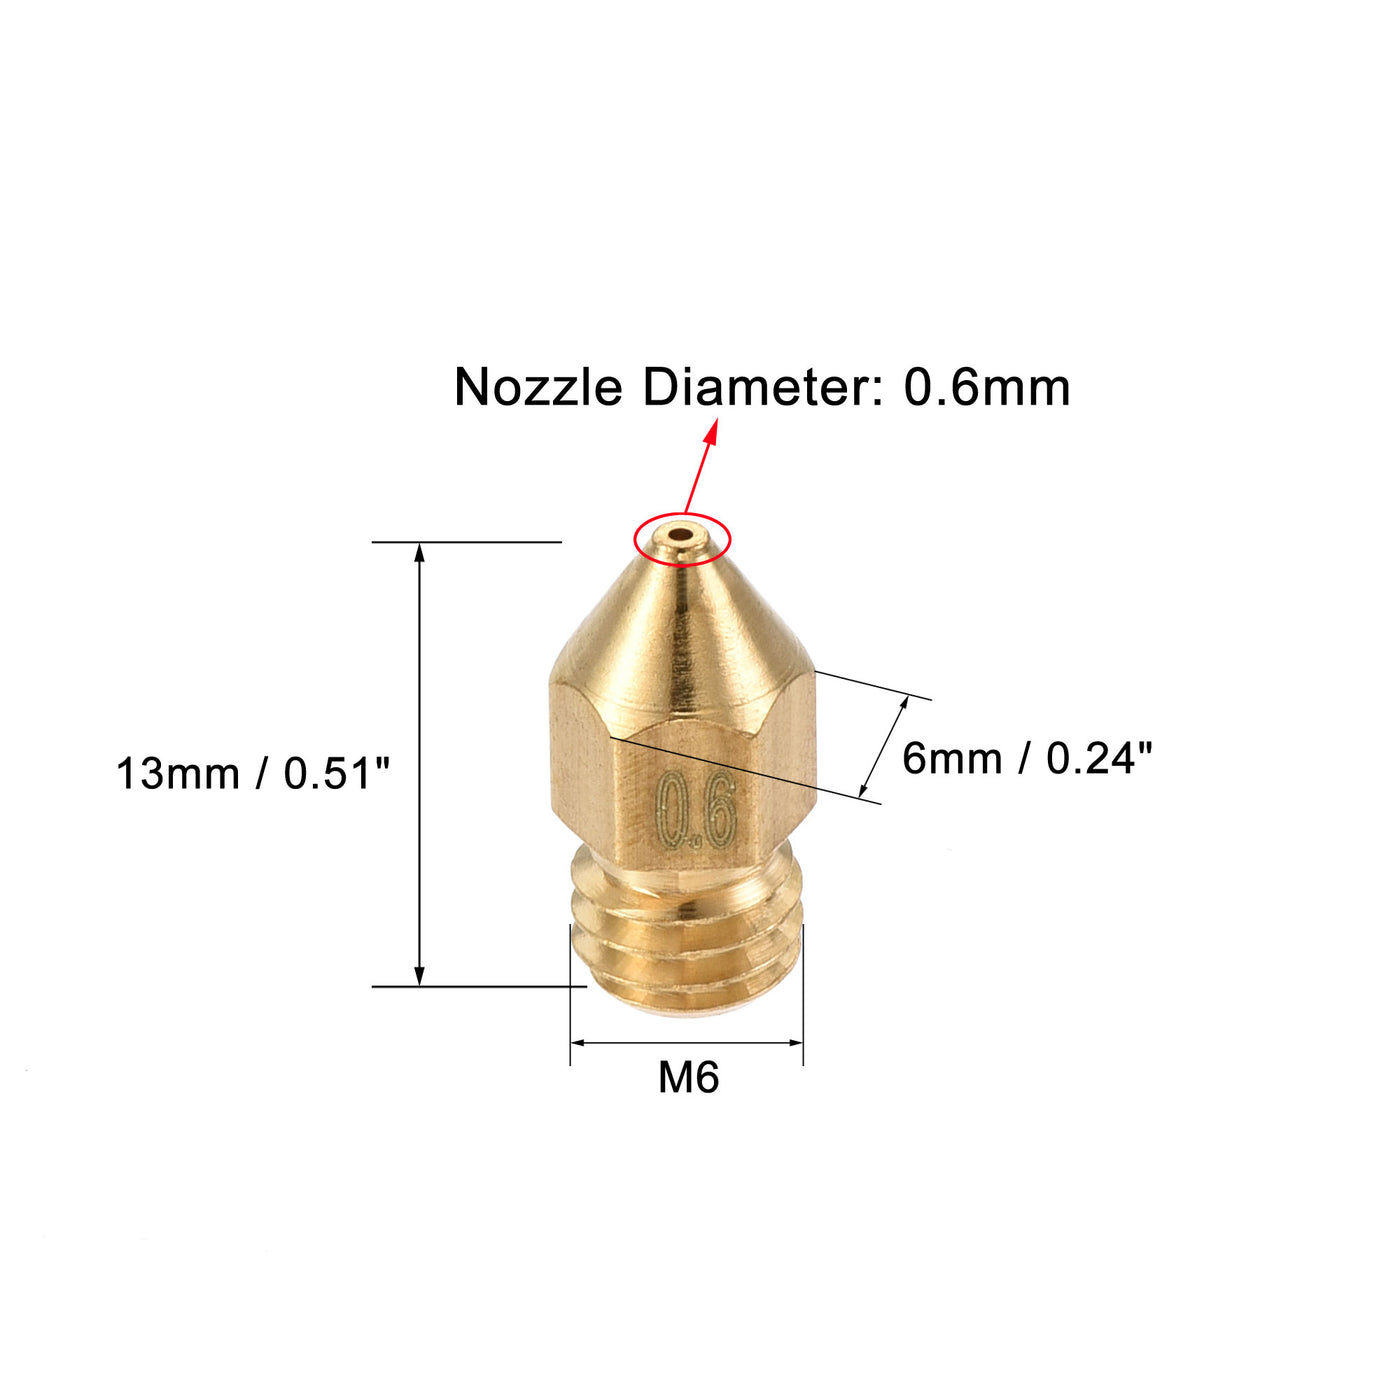 uxcell Uxcell 0.6mm 3D Printer Nozzle, 24pcs M6 Thread for MK8 1.75mm Extruder Print, Brass